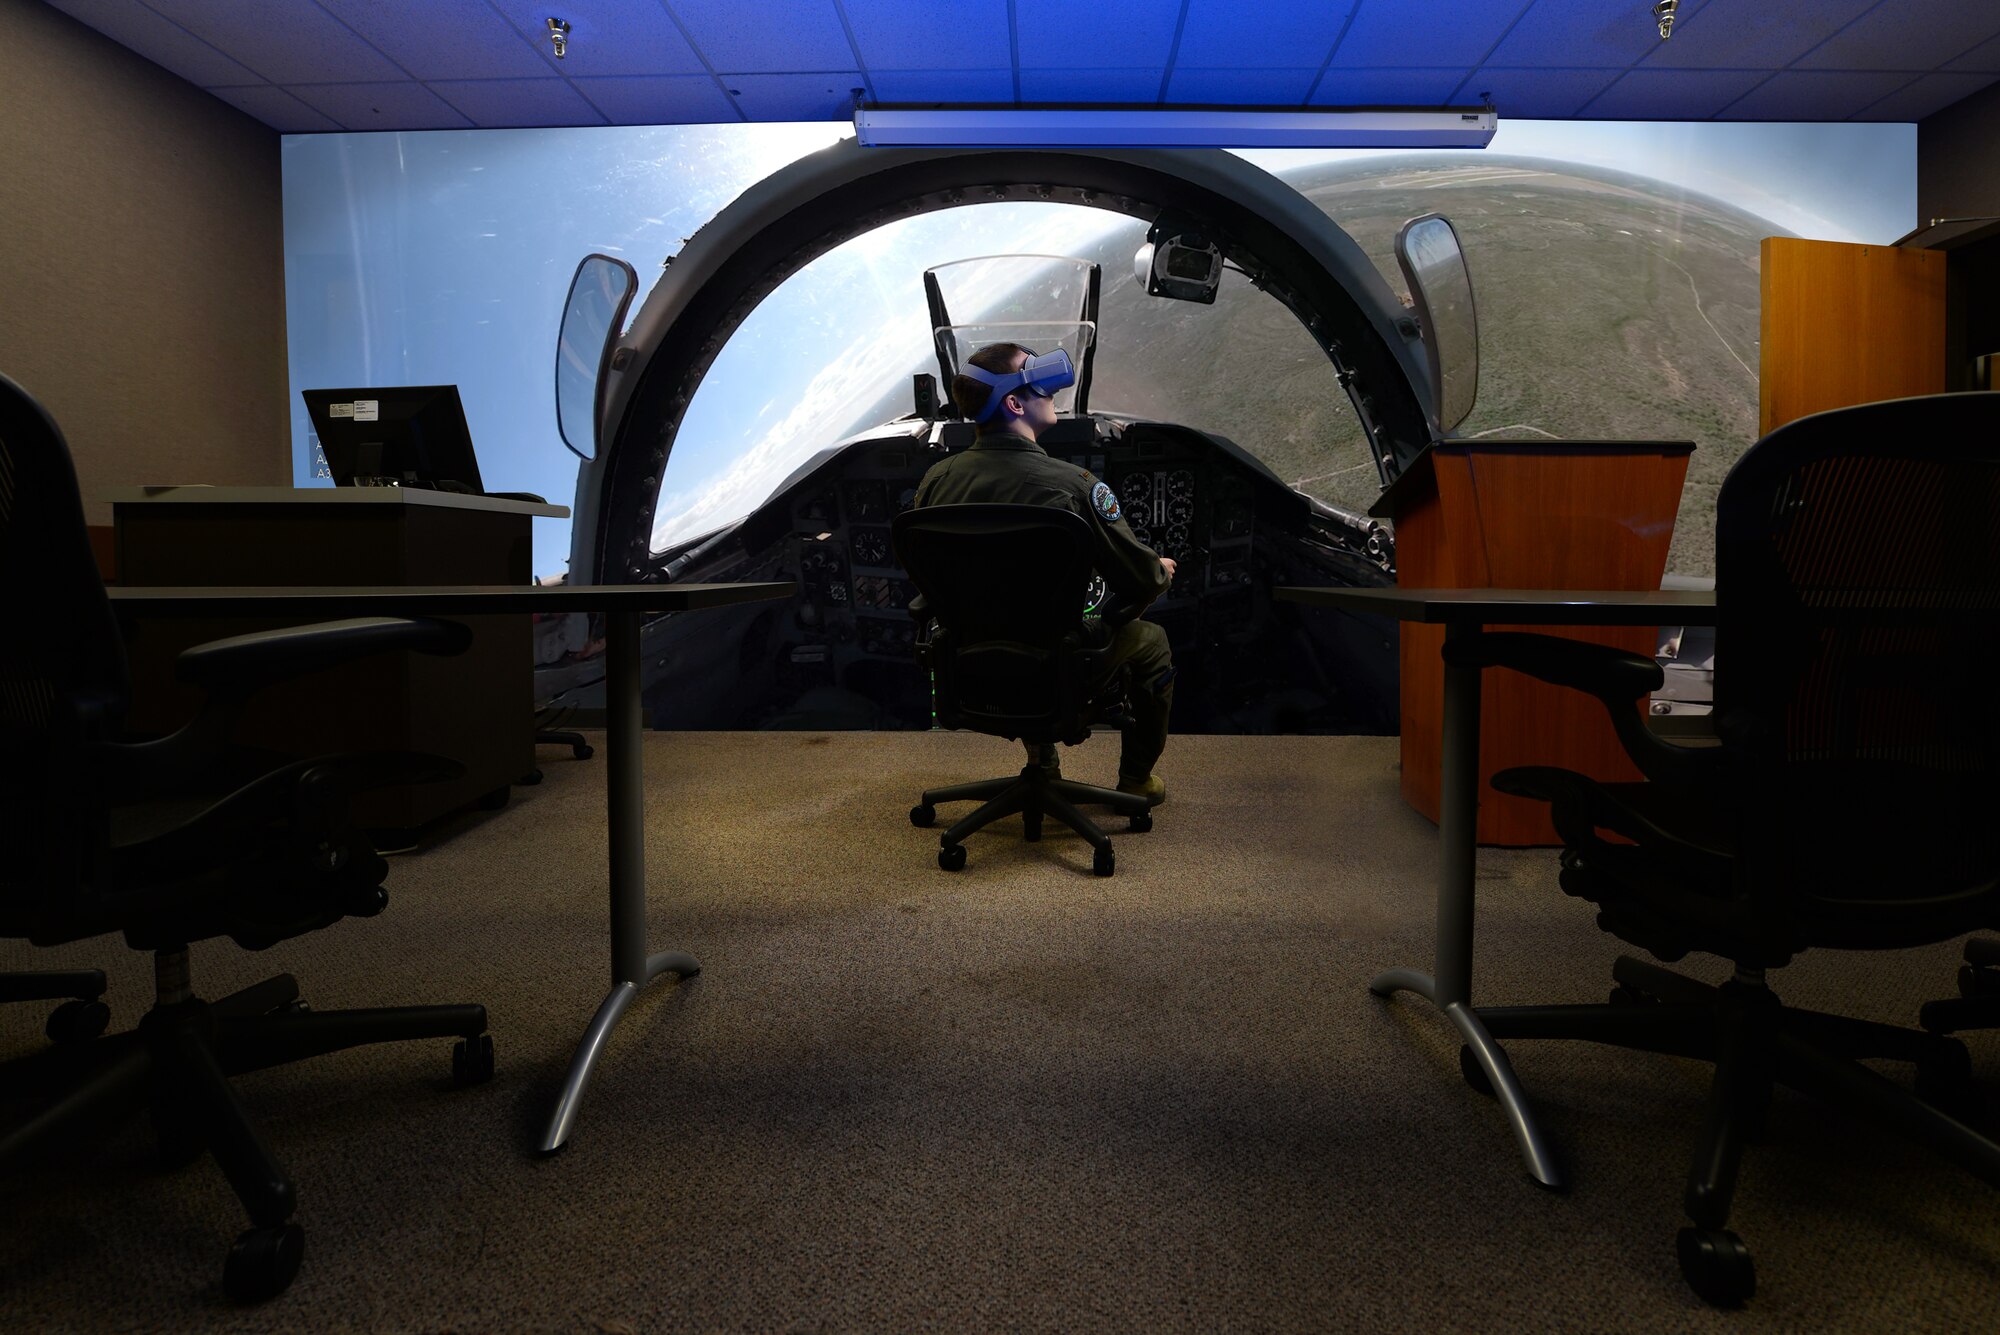 A student pilot assigned to the 87th Flying Training Squadron, immerses himself into a prototype virtual reality training solution at Laughlin Air Force Base, Texas, Jan. 16, 2019. Instructor pilots from the 87th Flying Training Squadron, like Capt. Jason Dark, are looking to boost traditional classroom lessons on aircraft maneuvers and provide a better course for students with the help of virtual reality. (U.S. Air Force illustration by Senior Airman Benjamin N. Valmoja)